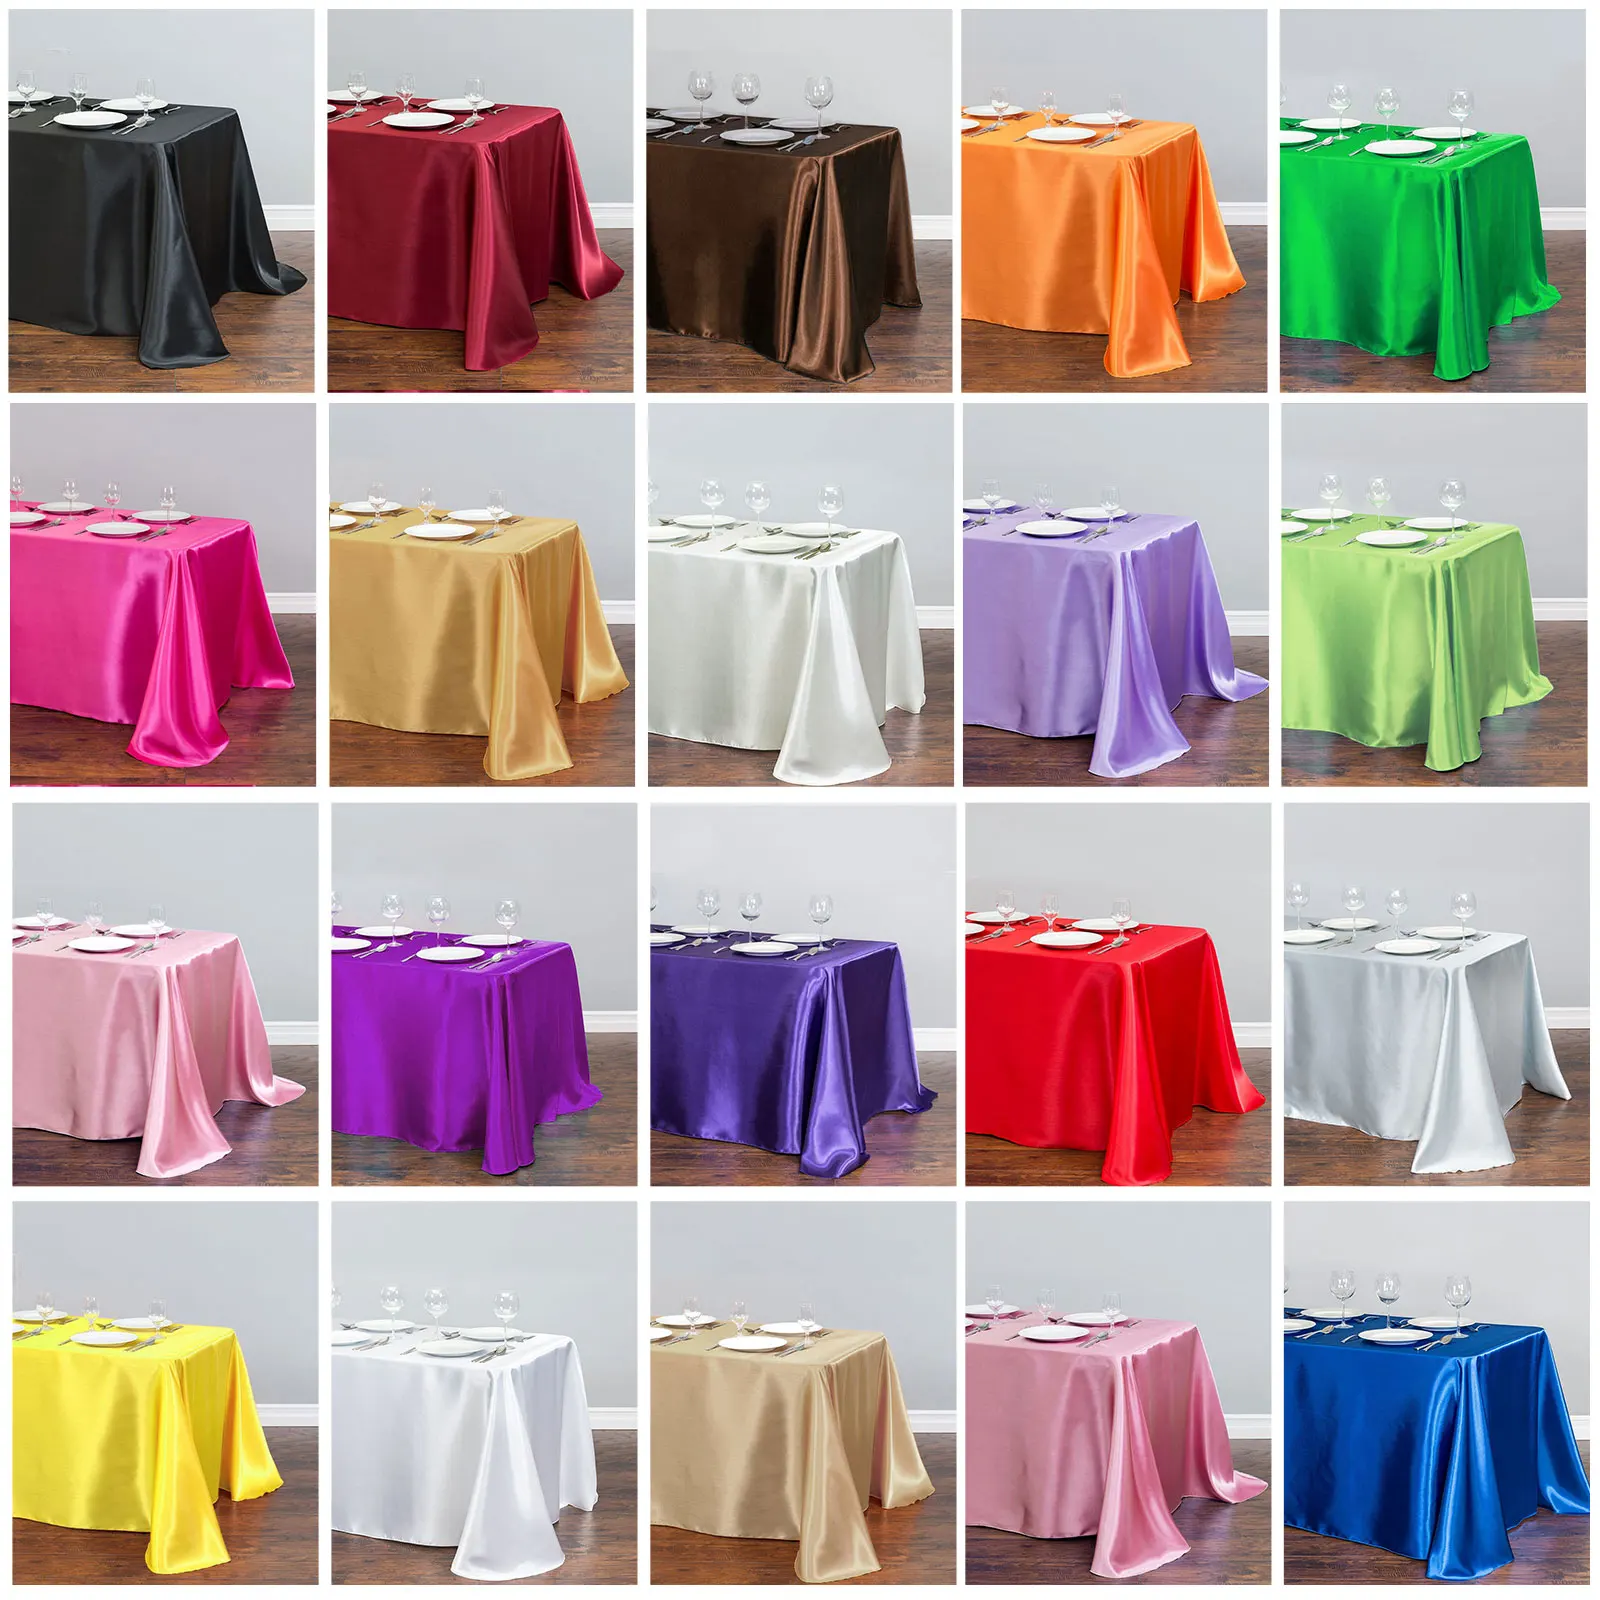 Satin Tablecloth 145x200cm Rectangular Hotel Banquet Table Cloth for Wedding Festival Party Table Cover Home Decoration